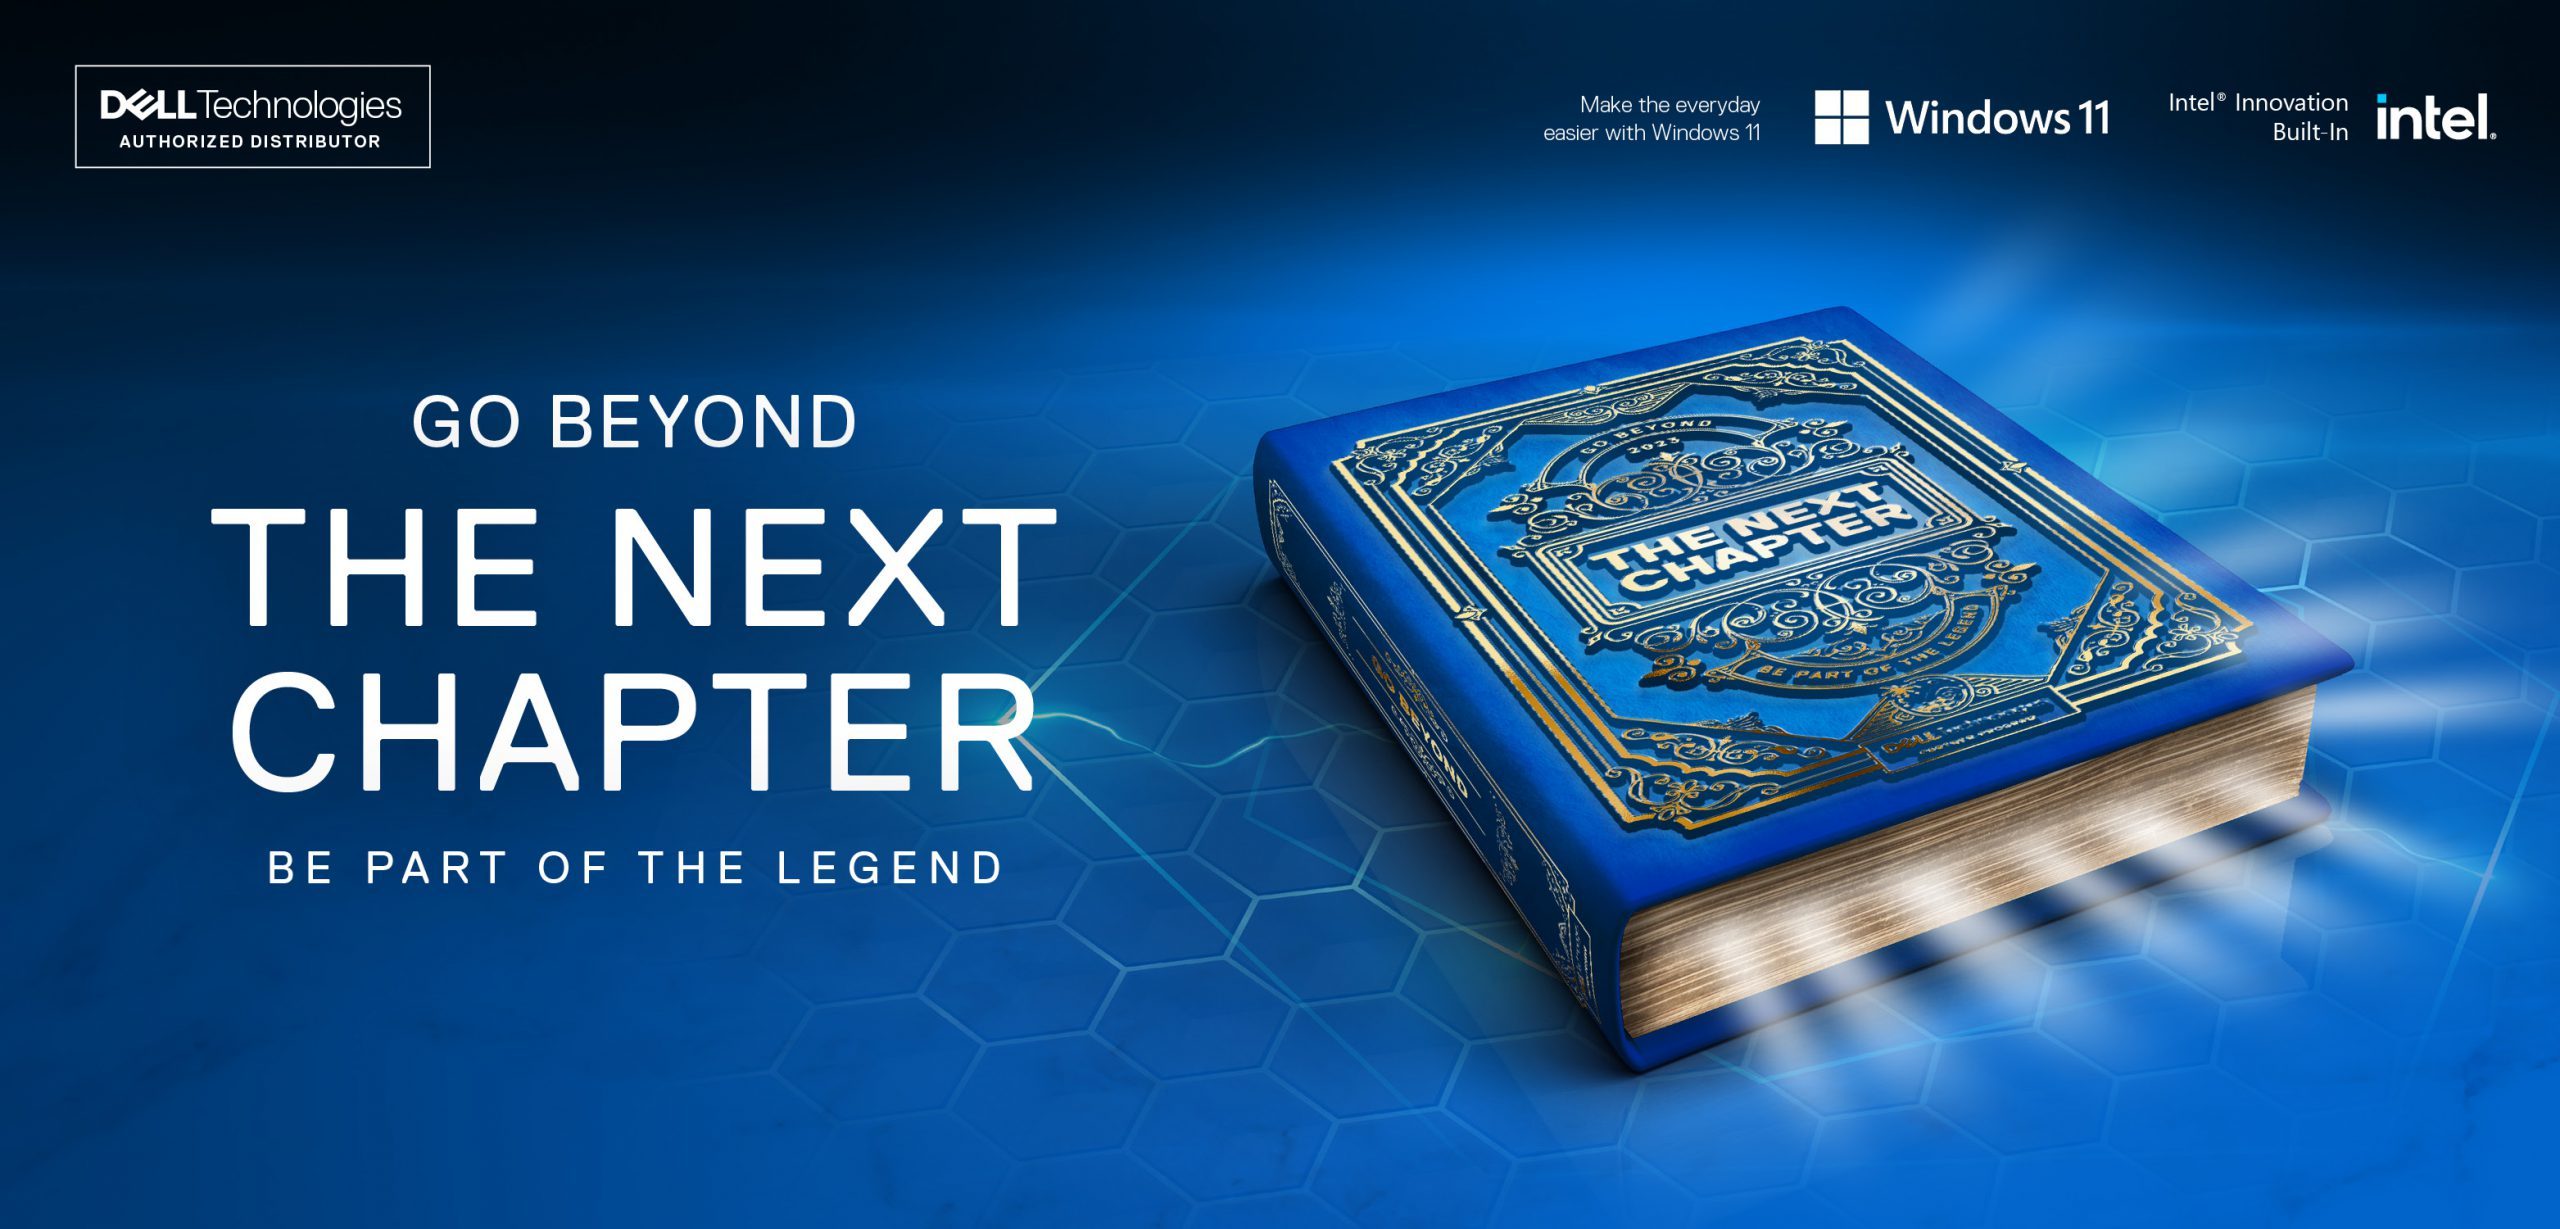 GO BEYOND - THE NEXT CHAPTER